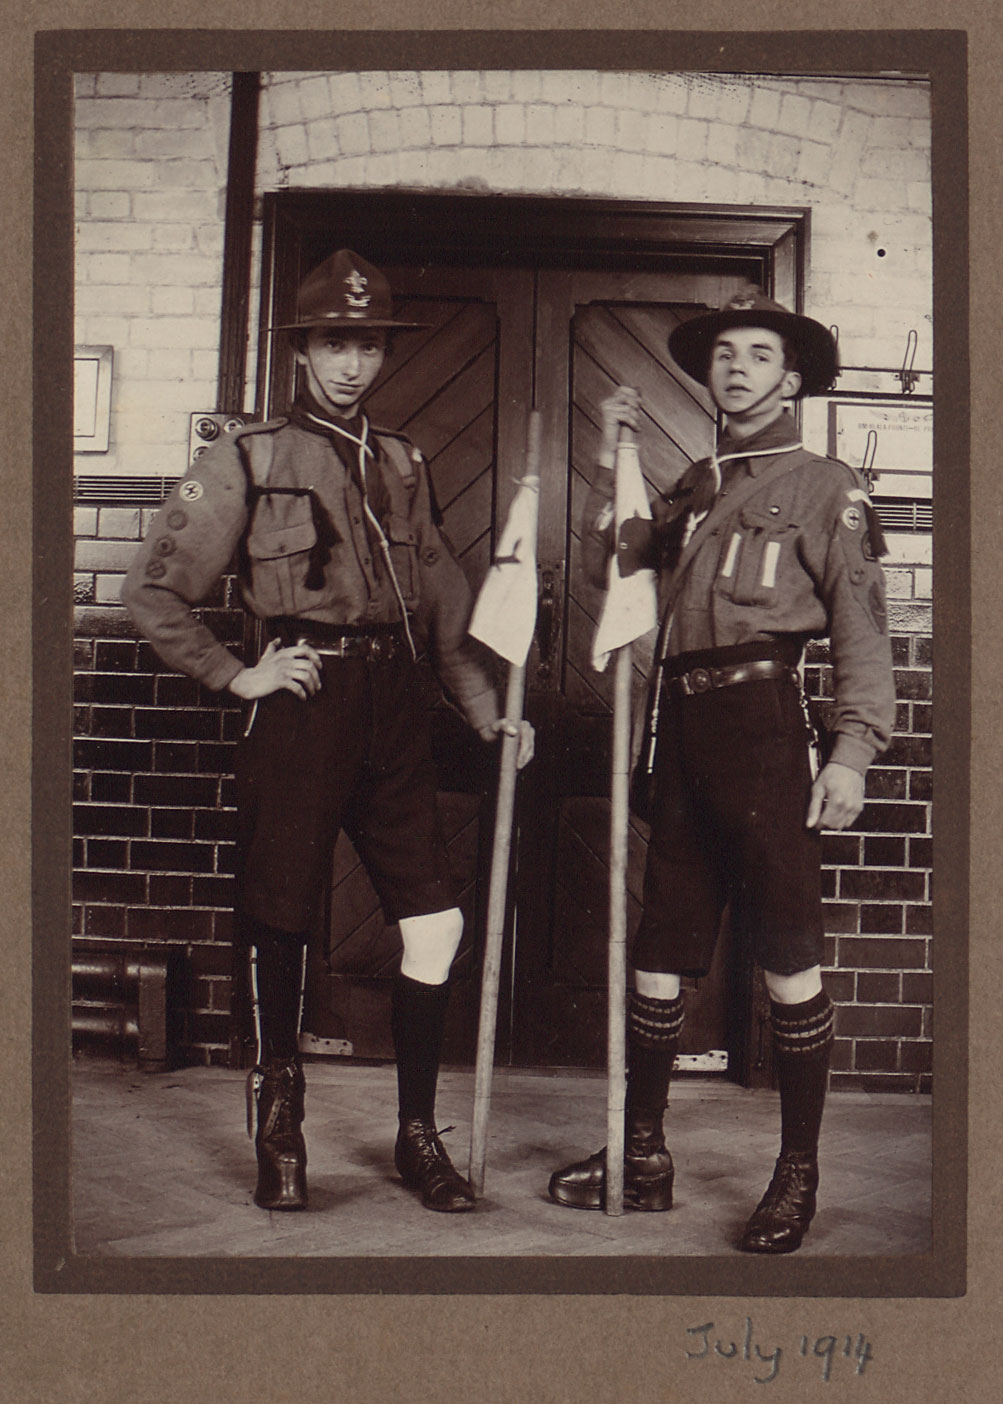 Two young men with scout uniforms and flags